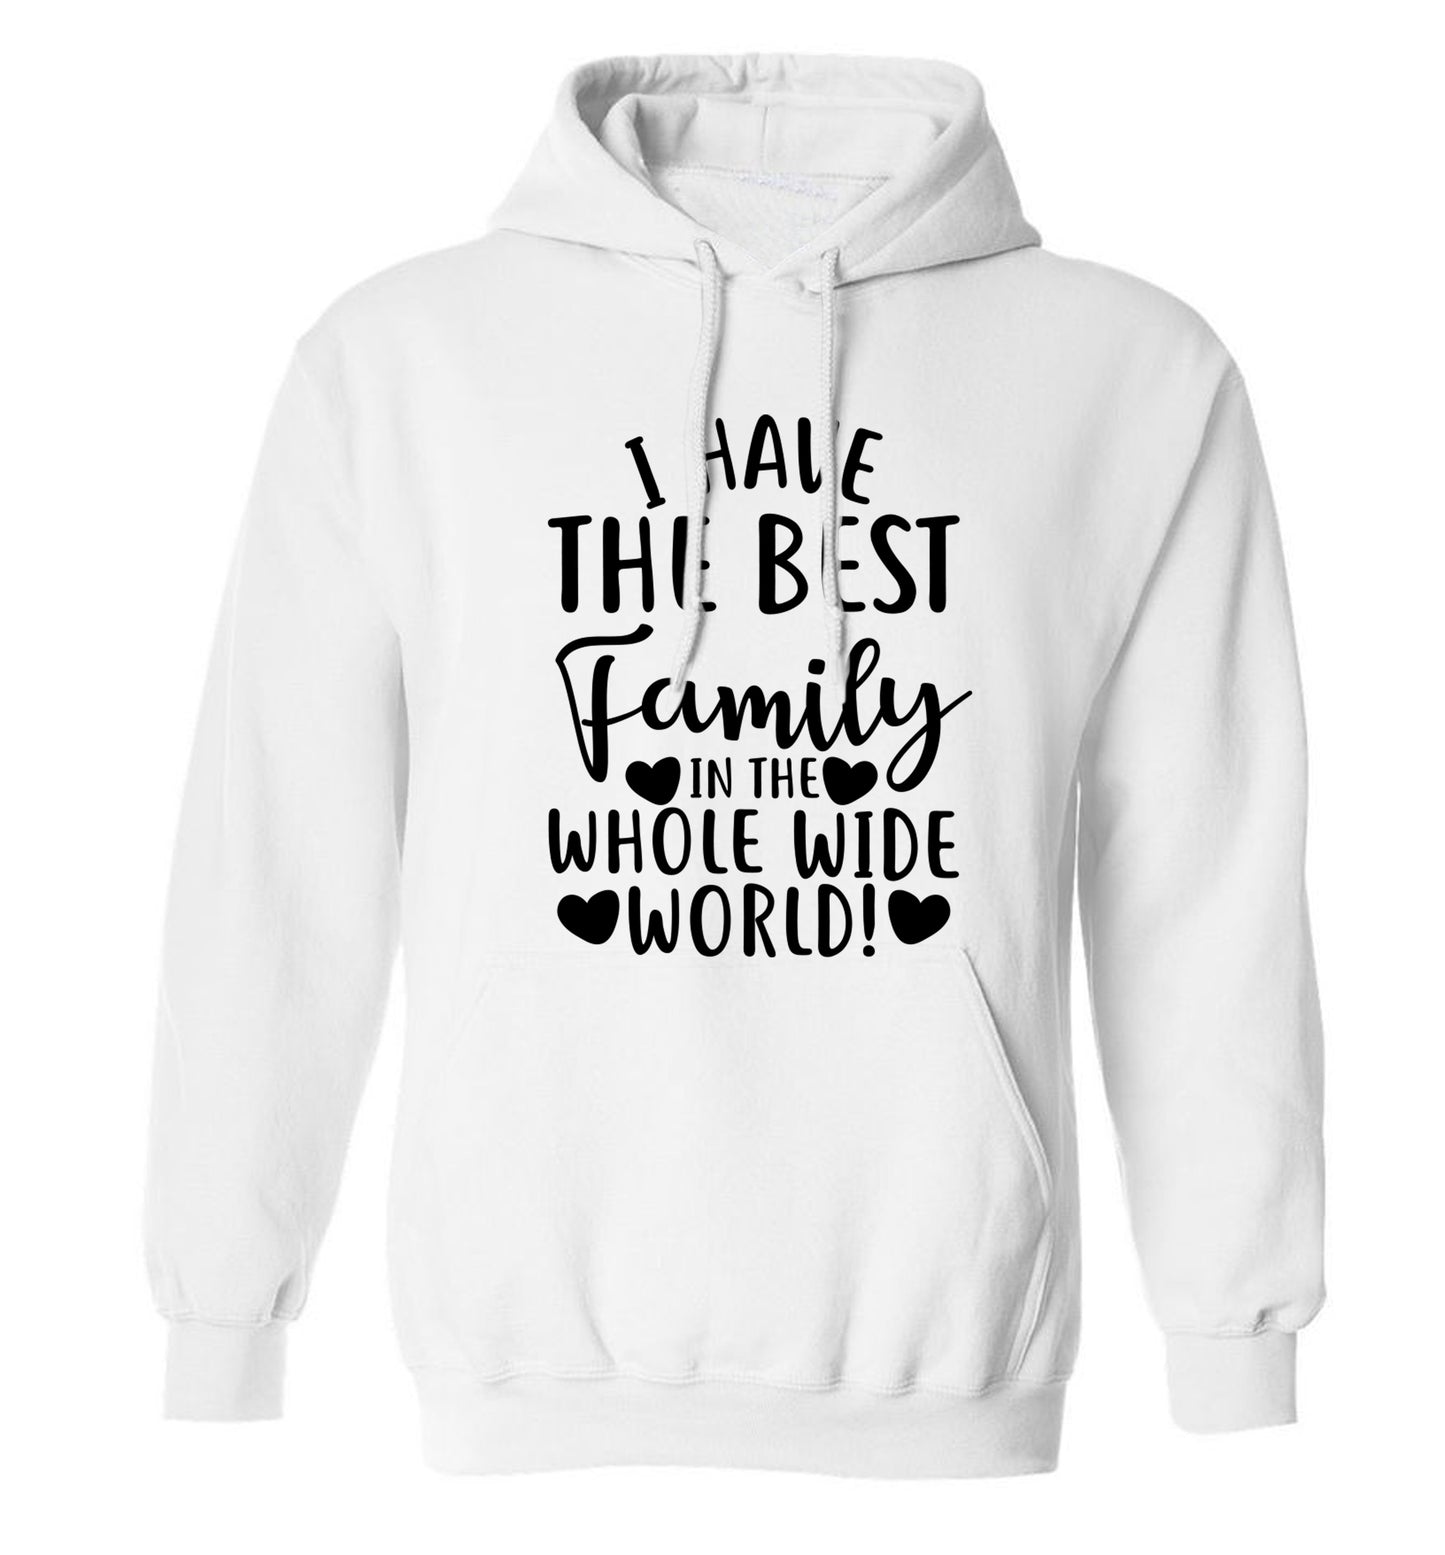 I have the best family in the whole wide world! adults unisex white hoodie 2XL